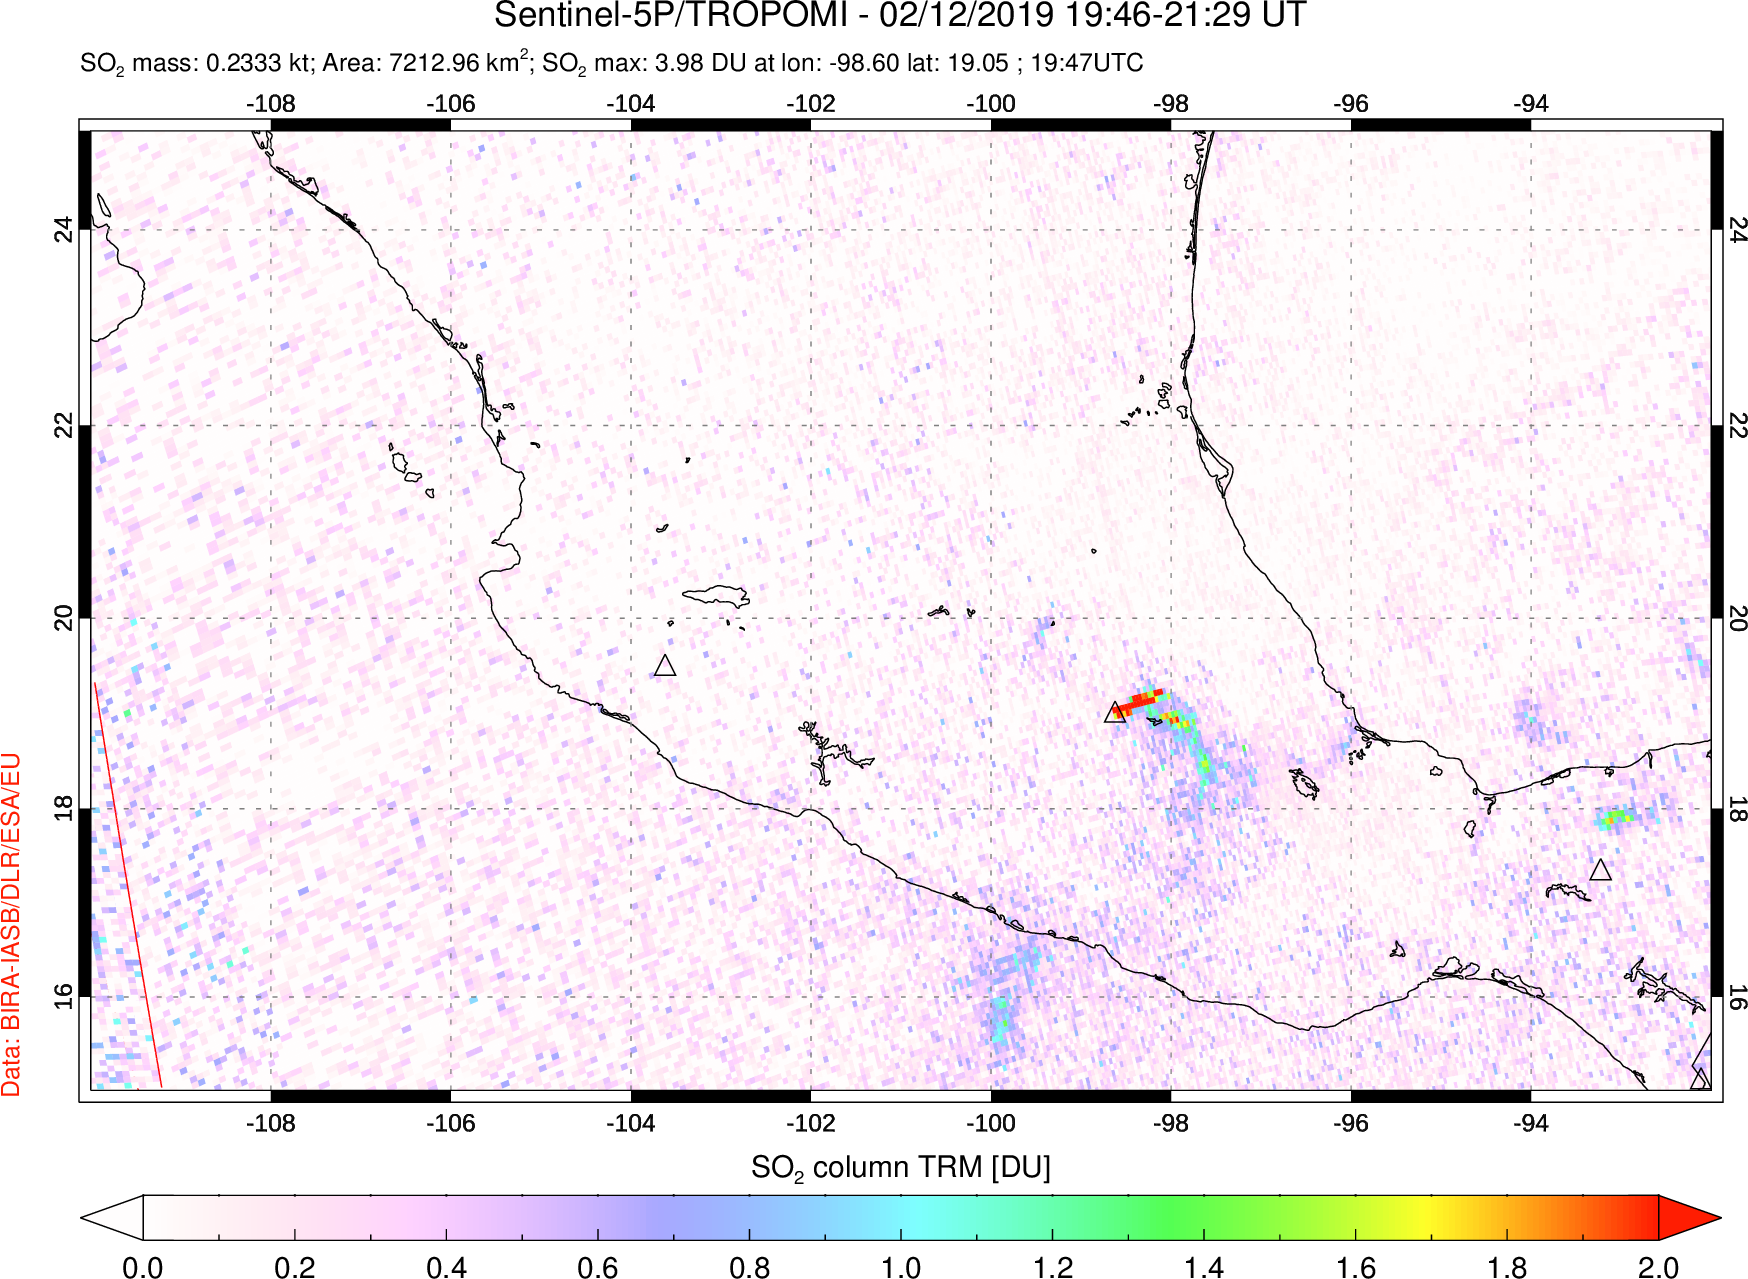 A sulfur dioxide image over Mexico on Feb 12, 2019.